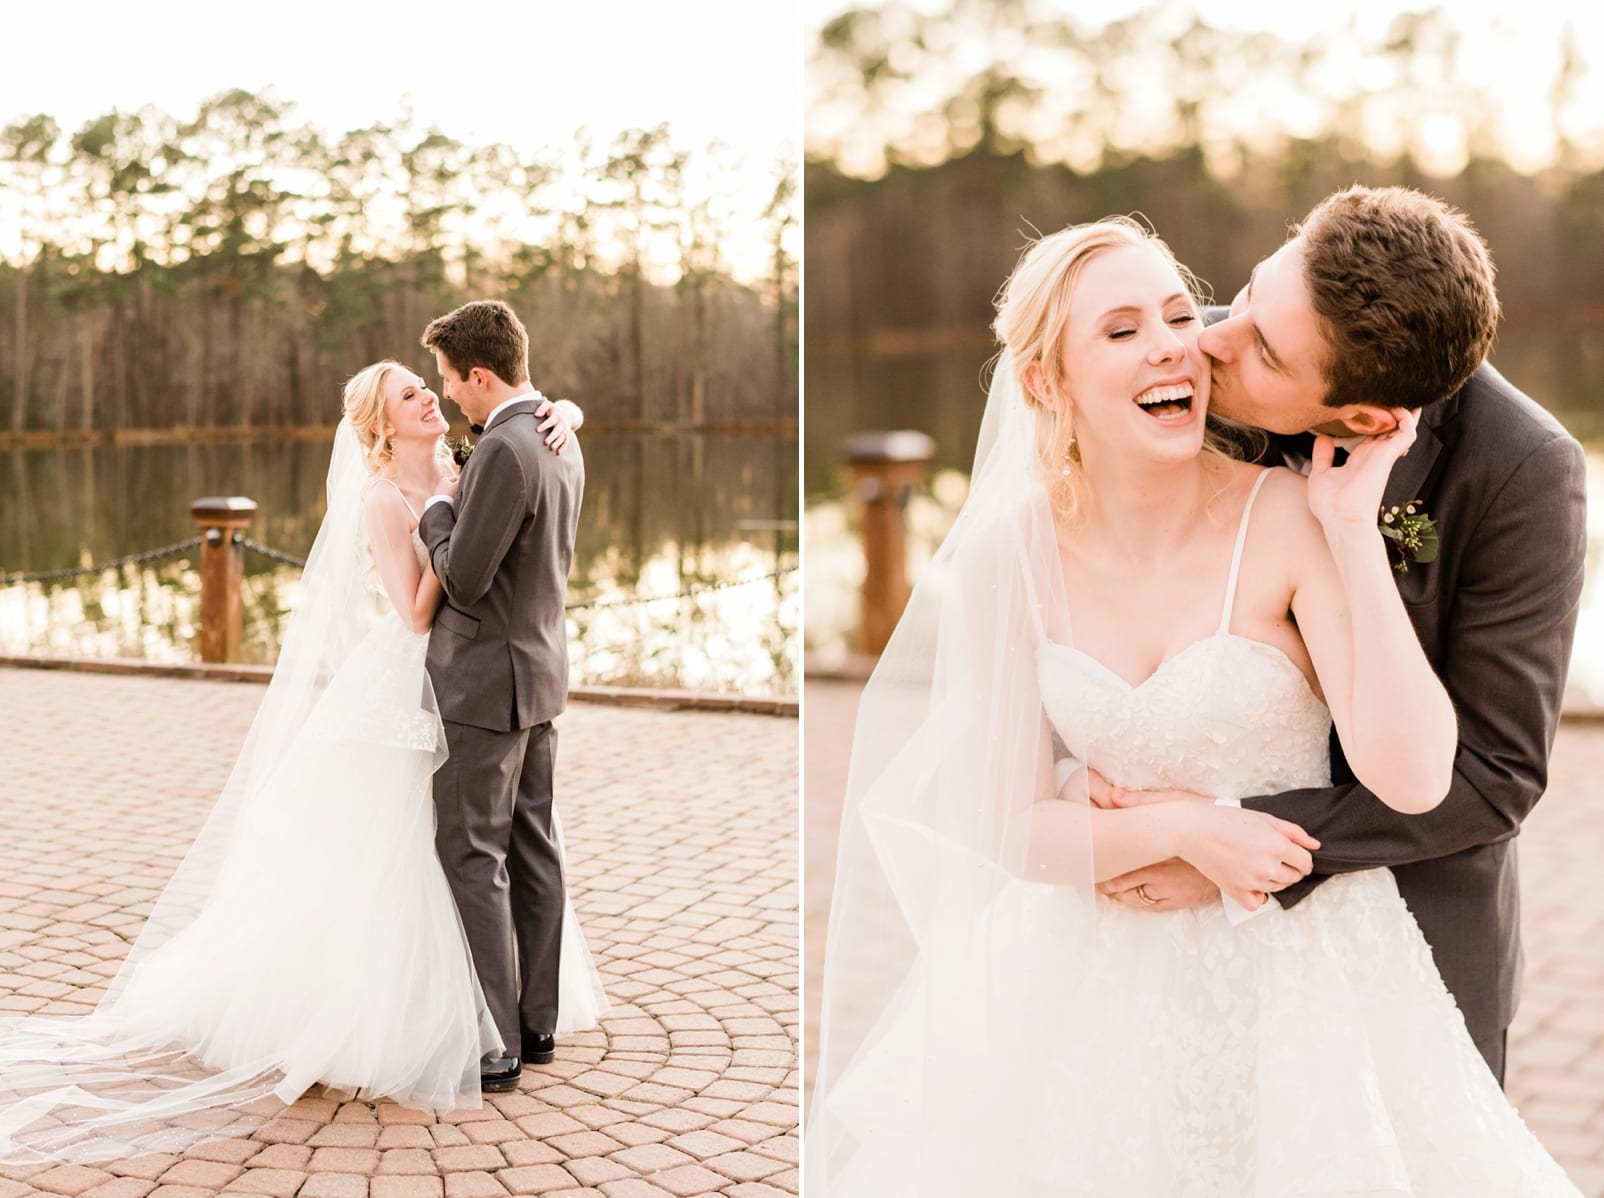 Angus Barn bride and groom laughing together in front of the lake on a brick patio photo